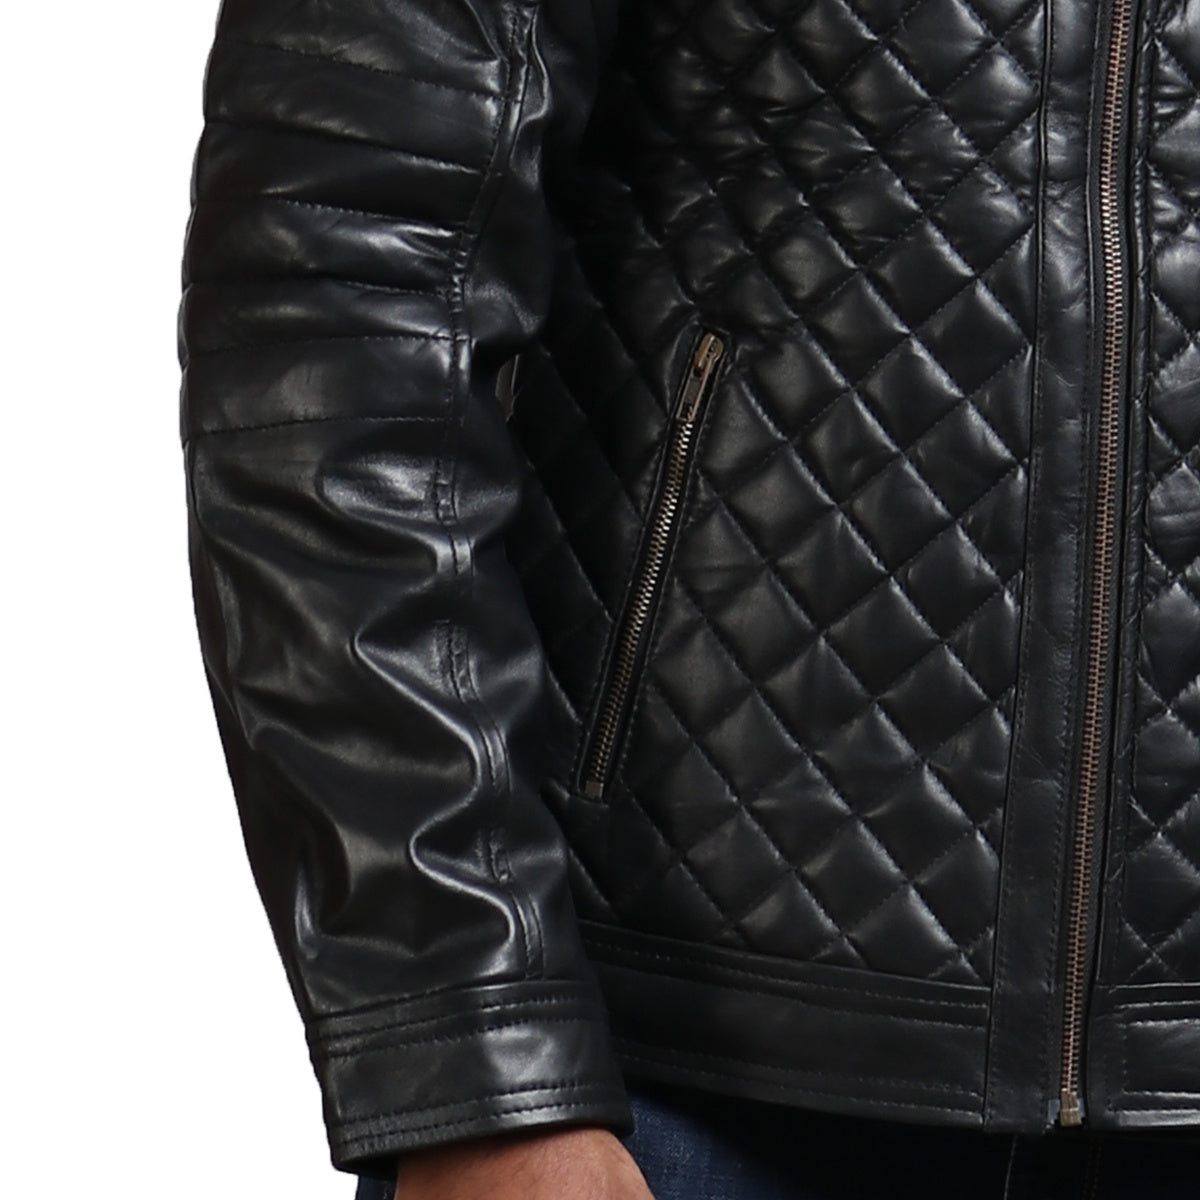 Winter Jacket Black Diamond Quilted